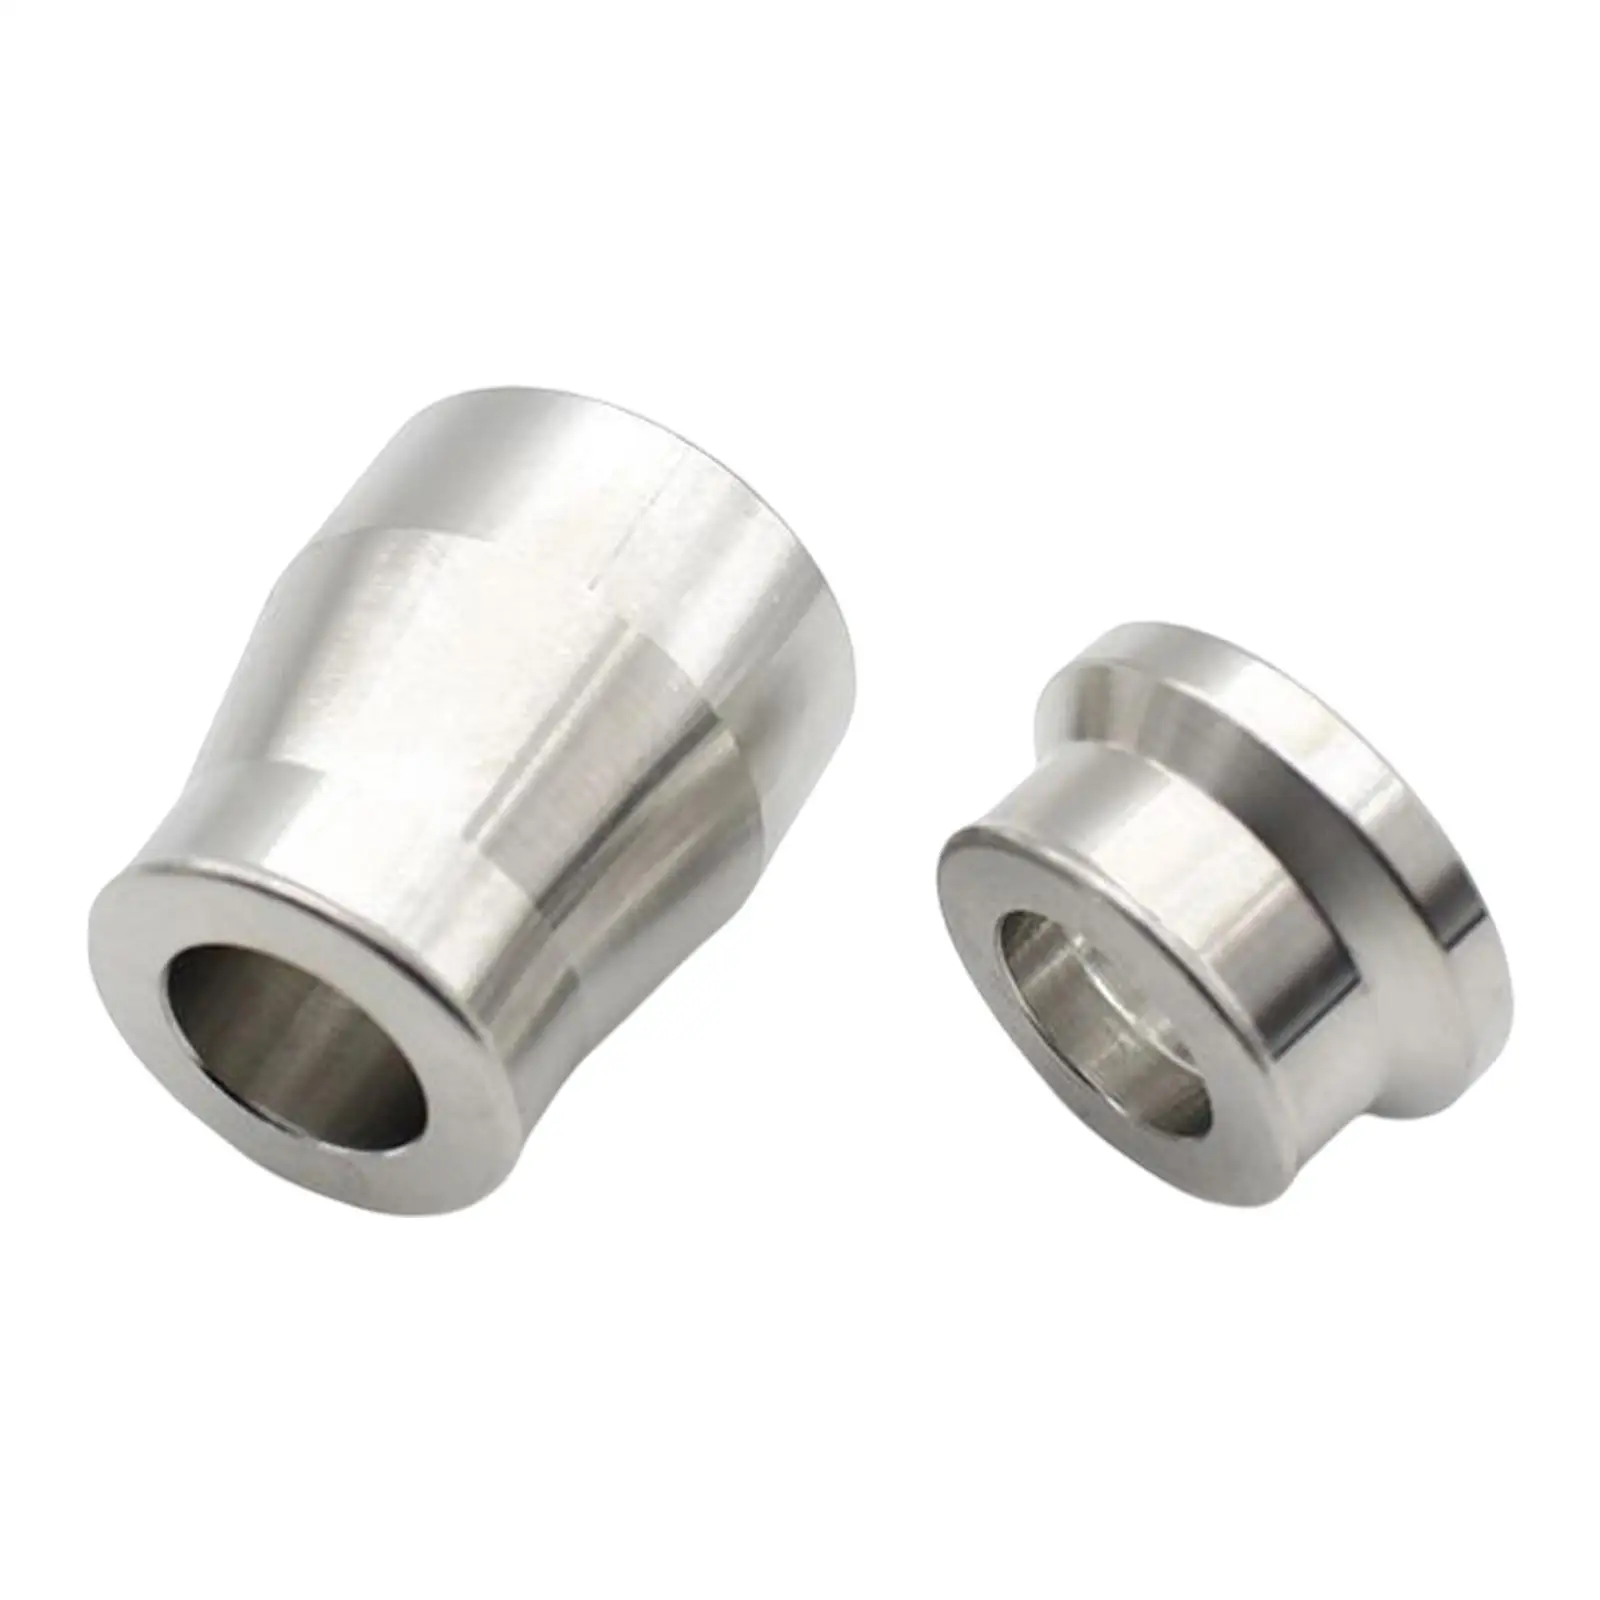 Bearings Hardened Reinforced Bushings Replacement Accessory Spare Parts Modified